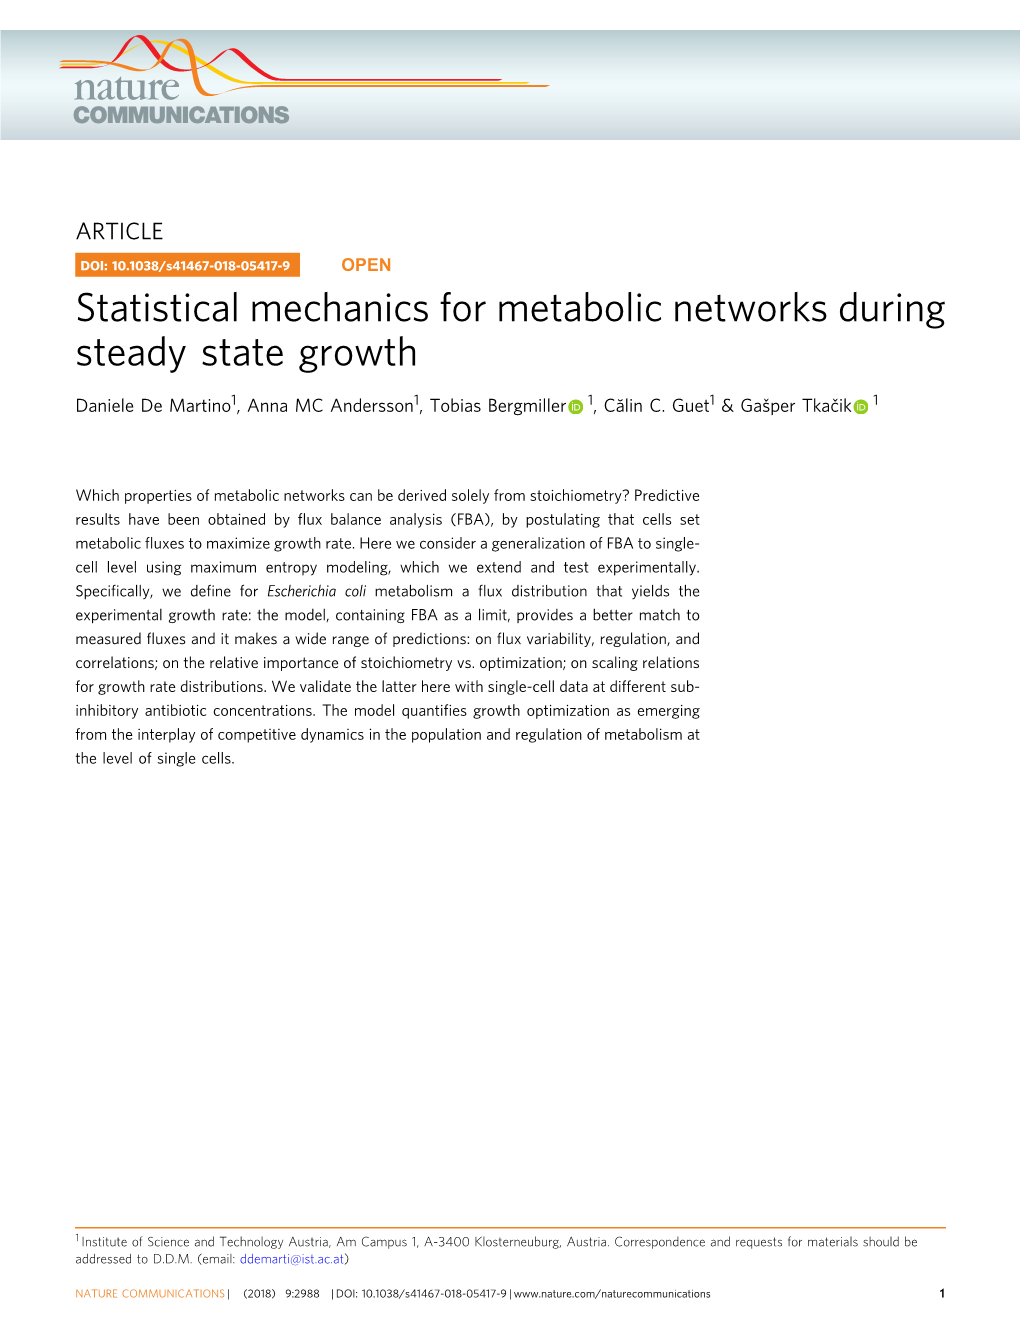 Statistical Mechanics for Metabolic Networks During Steady State Growth